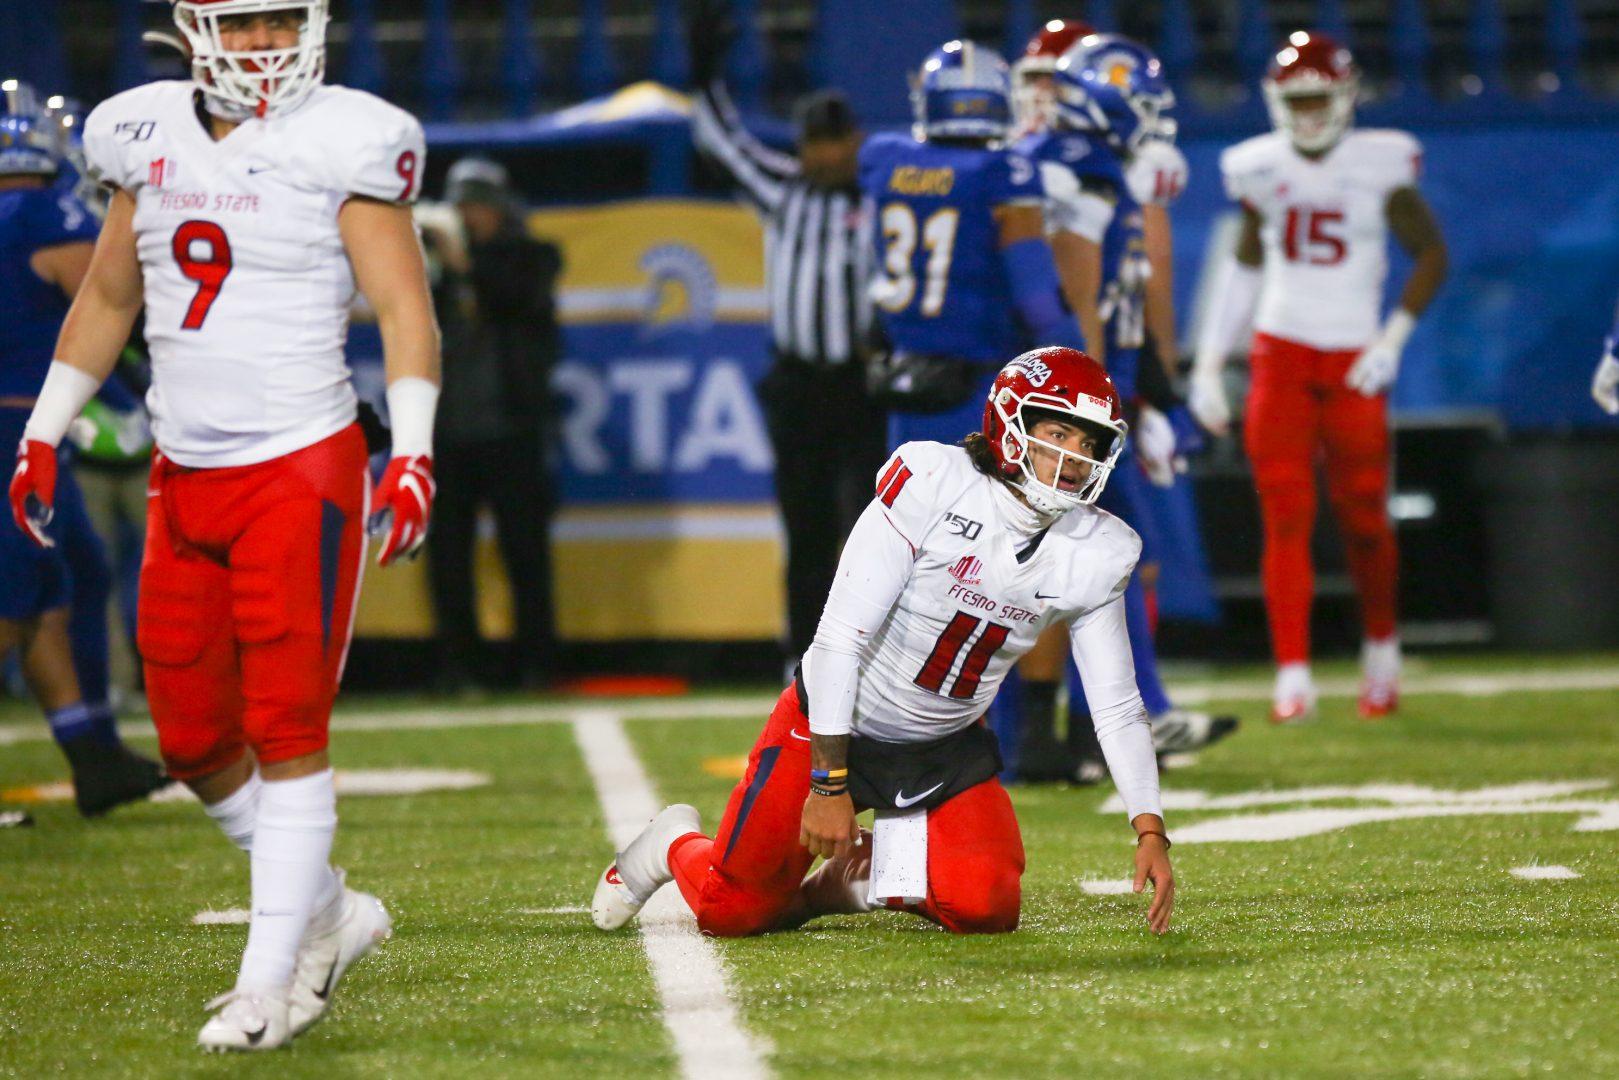 Fresno State quarterback Jorge Reyna after getting hit by an opponent during an away game at CEFCU Stadium in San Jose, California on Saturday, Nov. 30, 2019. (Armando Carreno/The Collegian.)